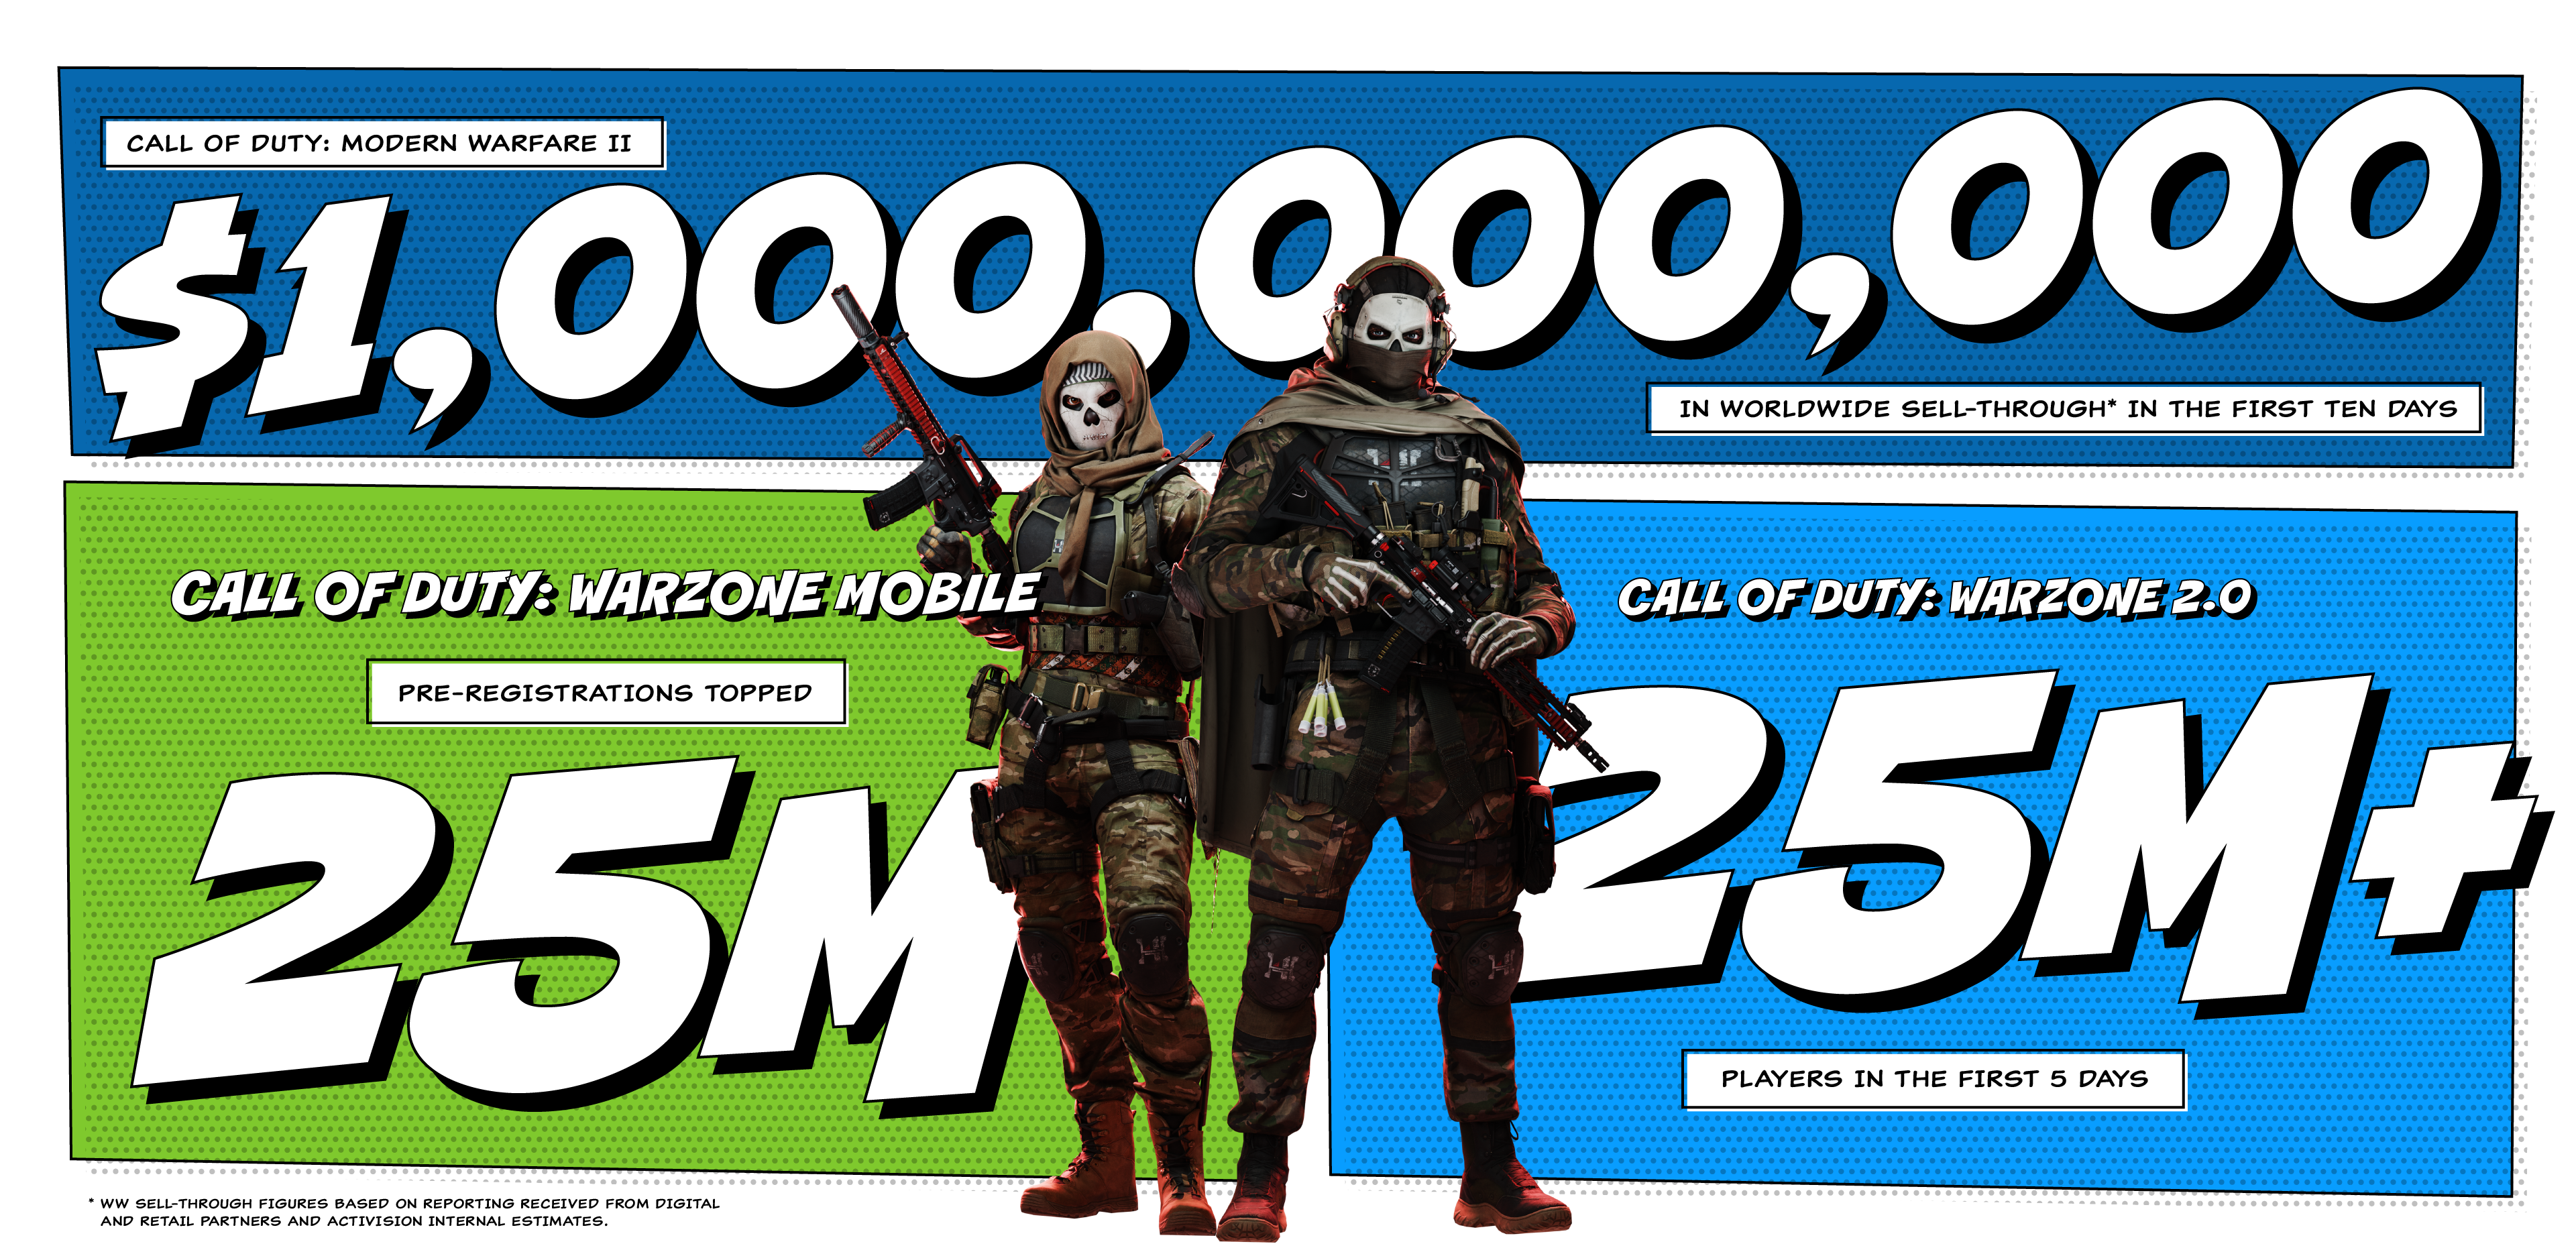 Warzone Mobile News on X: The 25M pre-registrations milestone